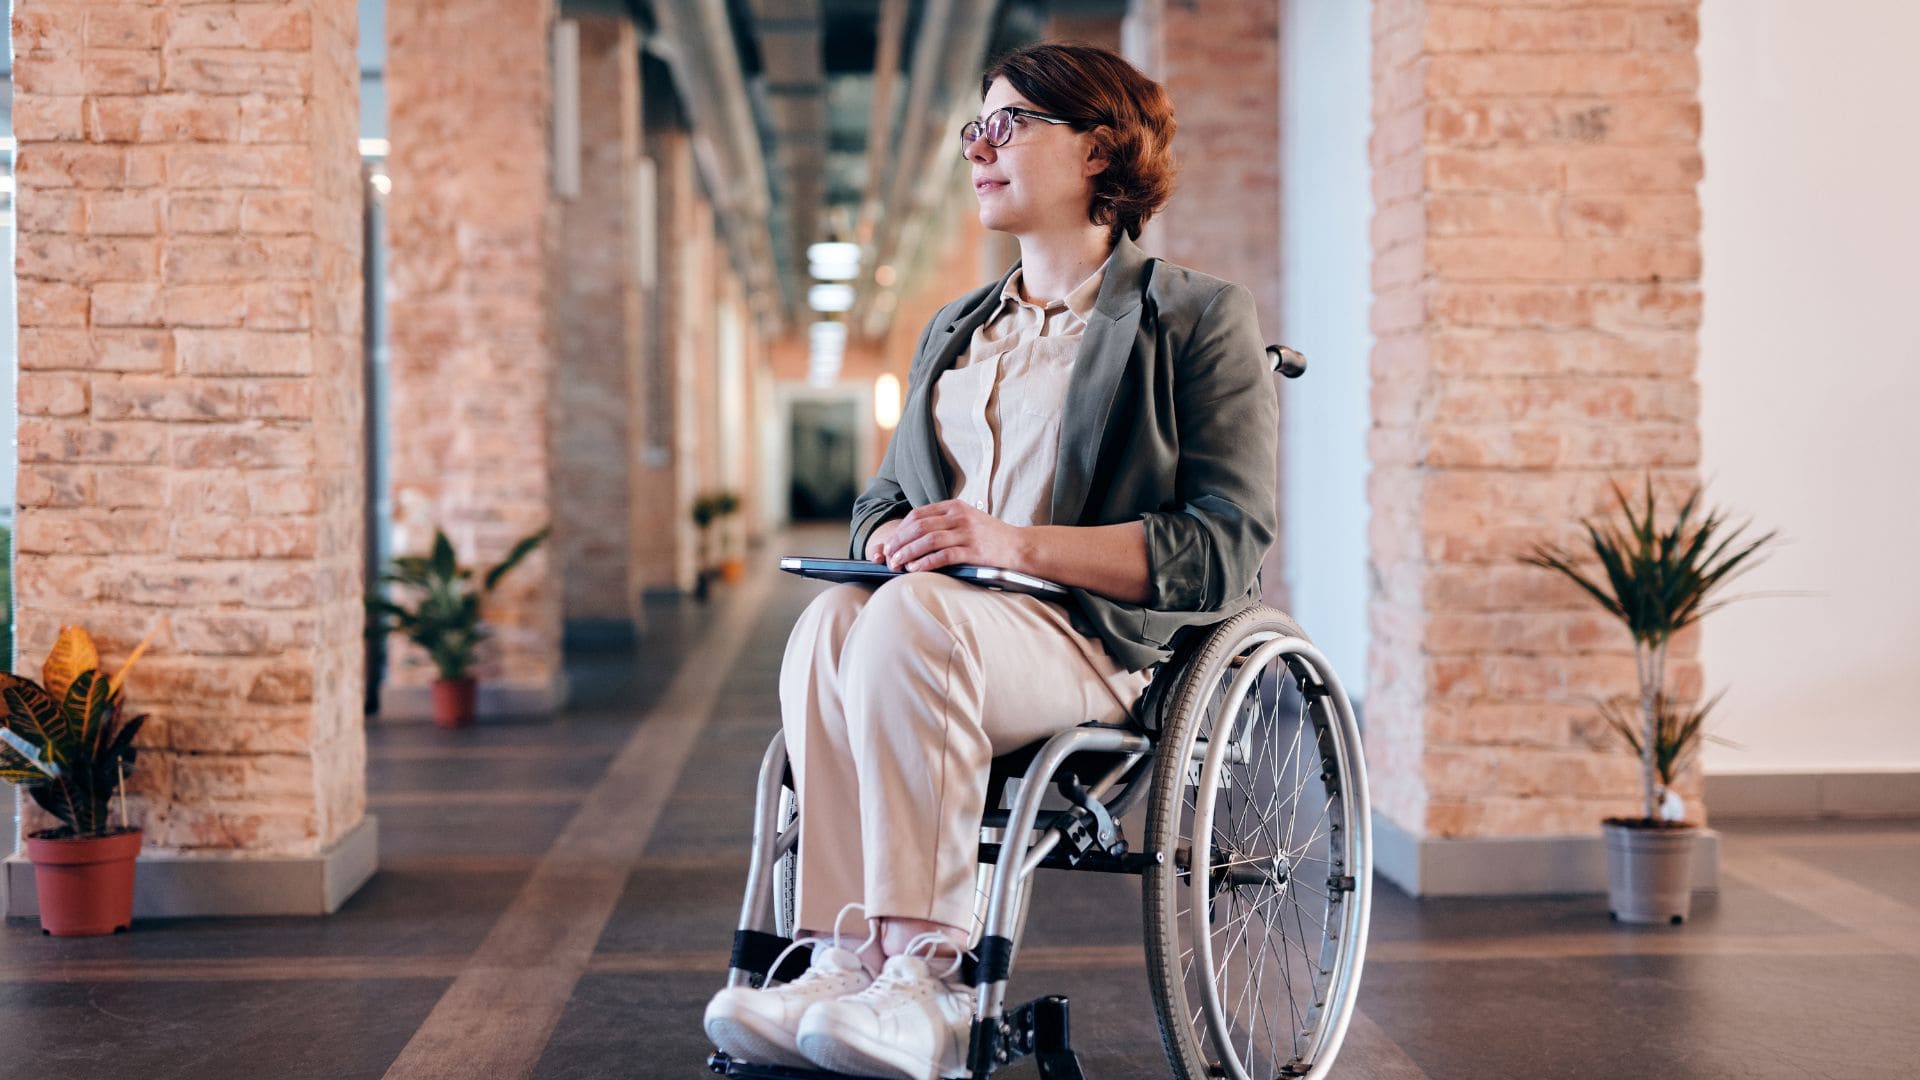 You have to meet some requirements to get the SSDI benefit